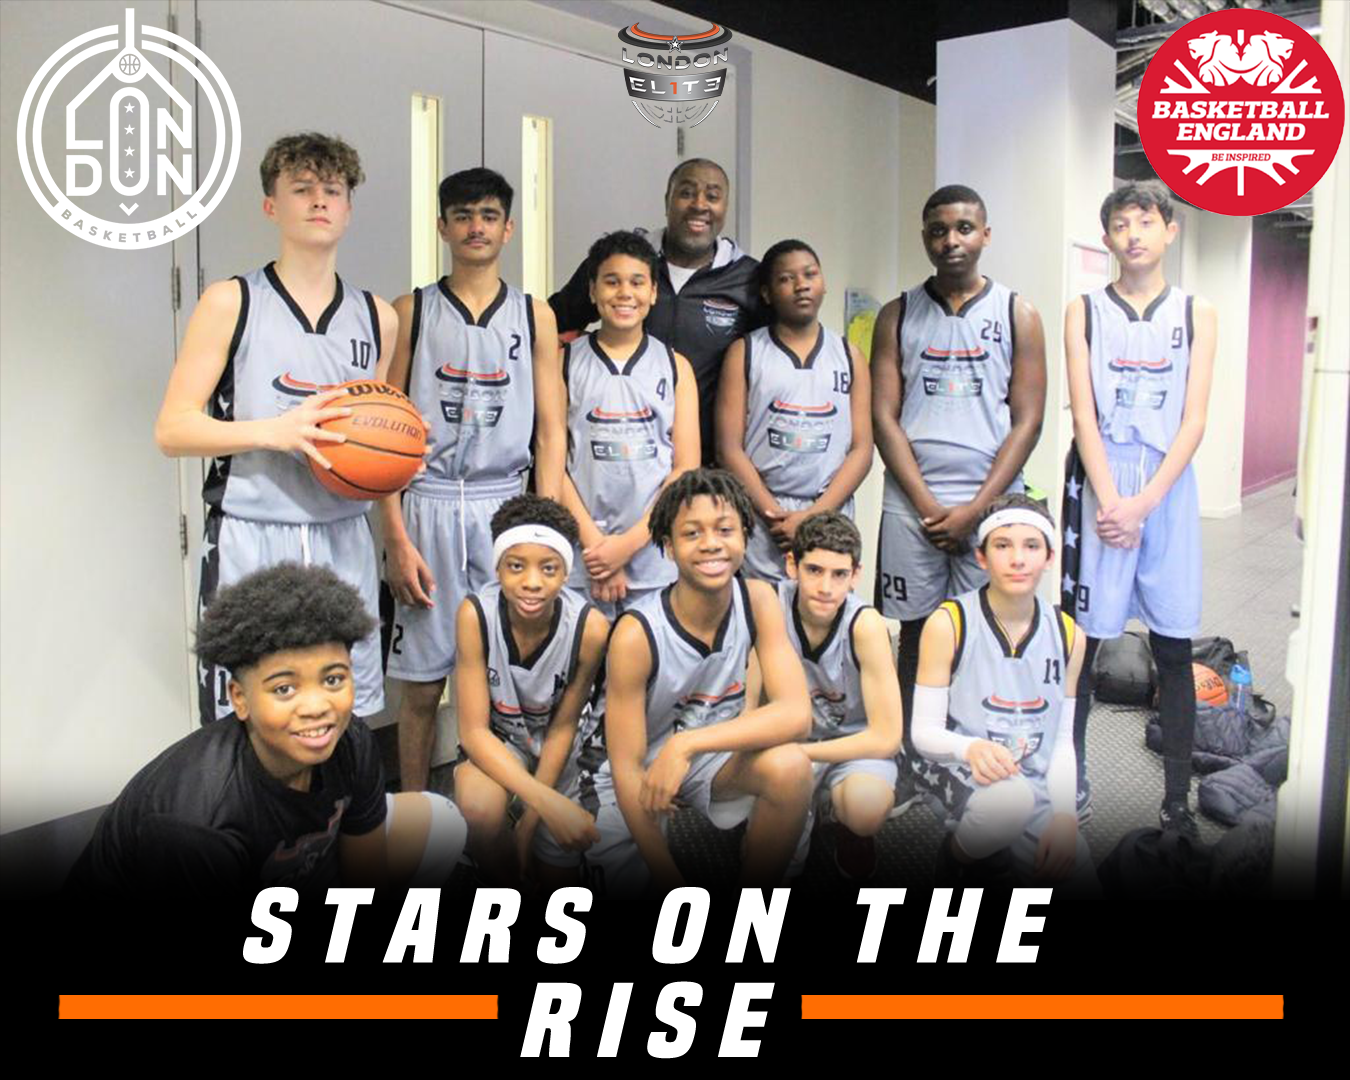 Stars on the rise...